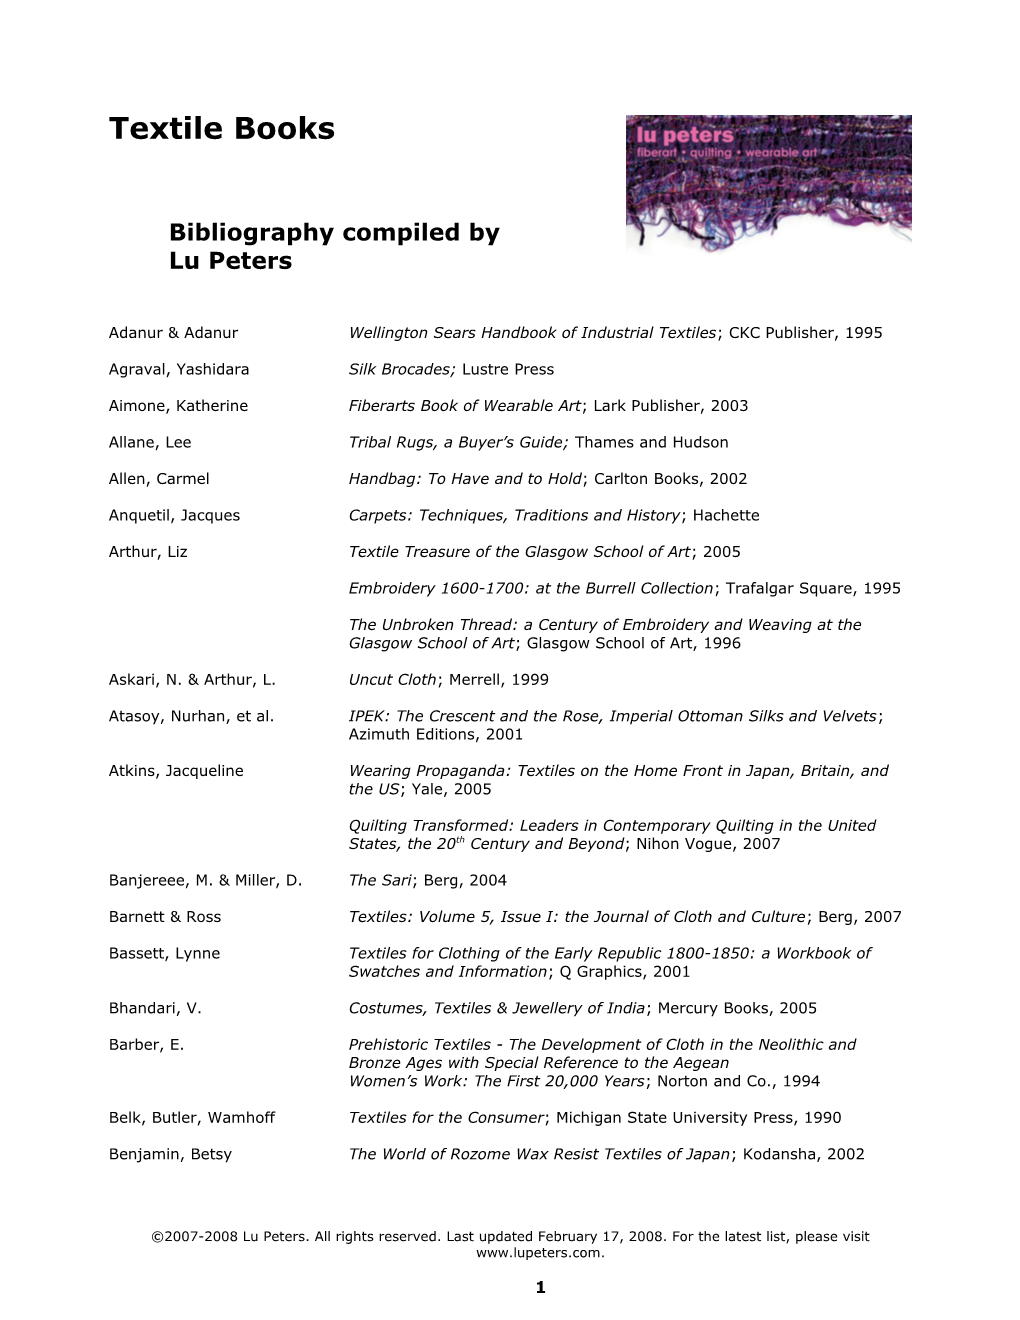 Bibliography Compiled by Lu Peters